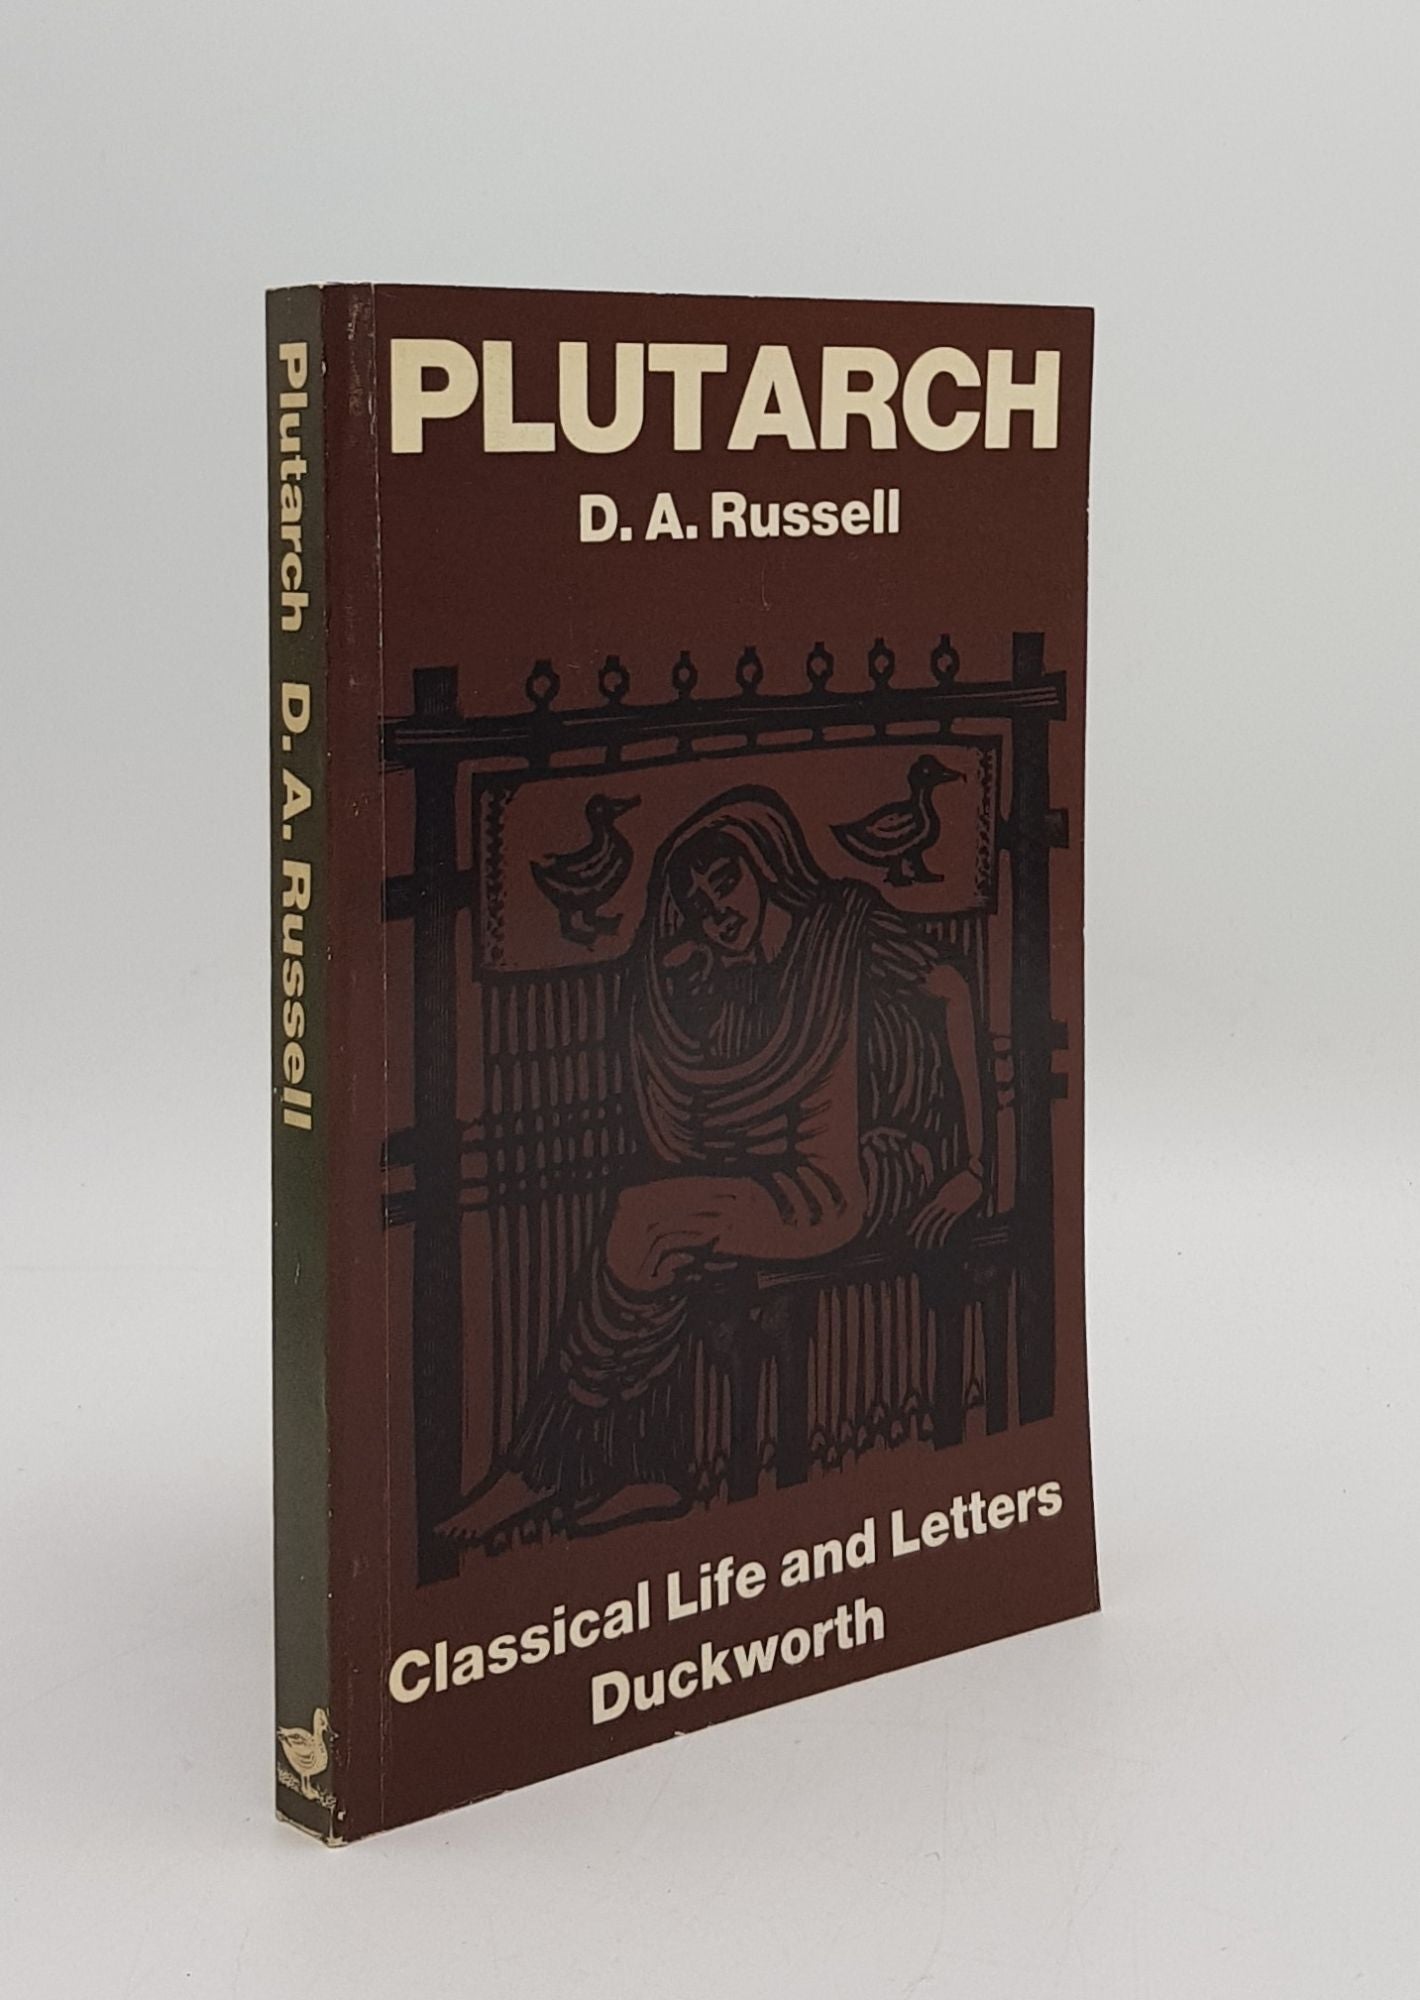 RUSSELL D.A. - Plutarch Classical Life and Letters